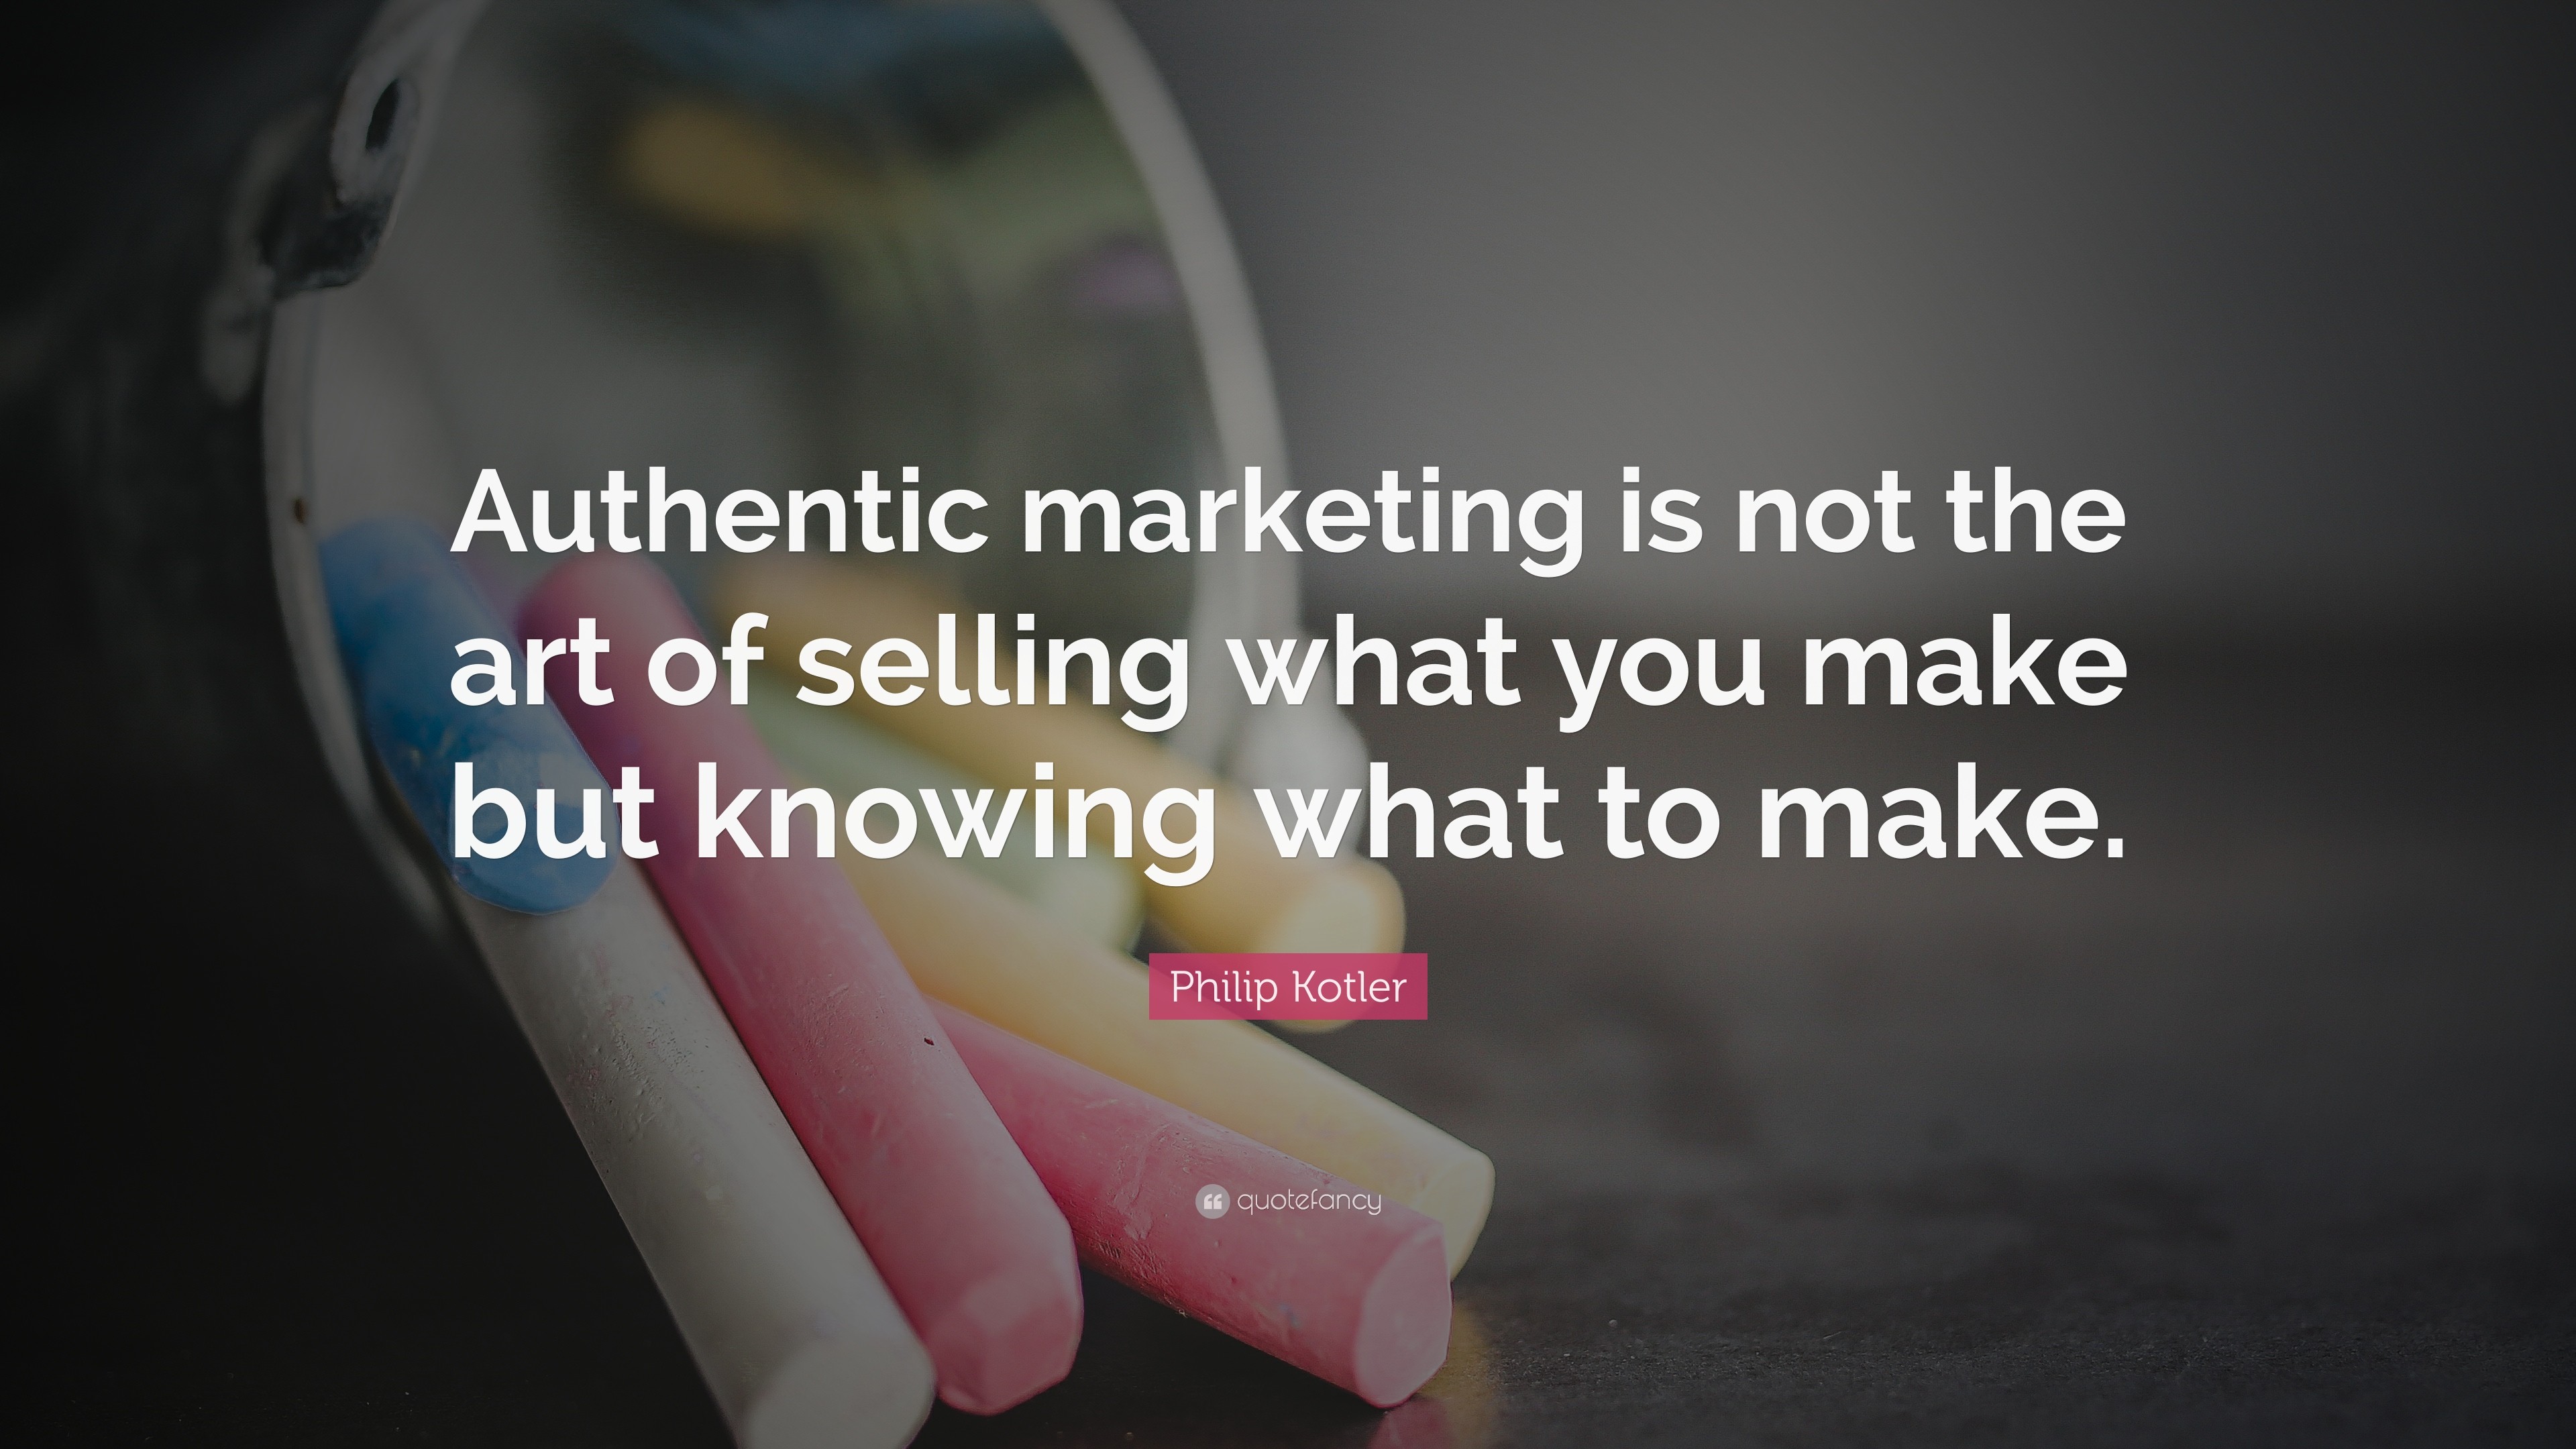 3840x2160 Philip Kotler Quote: “Authentic marketing is not the art of selling what  you make